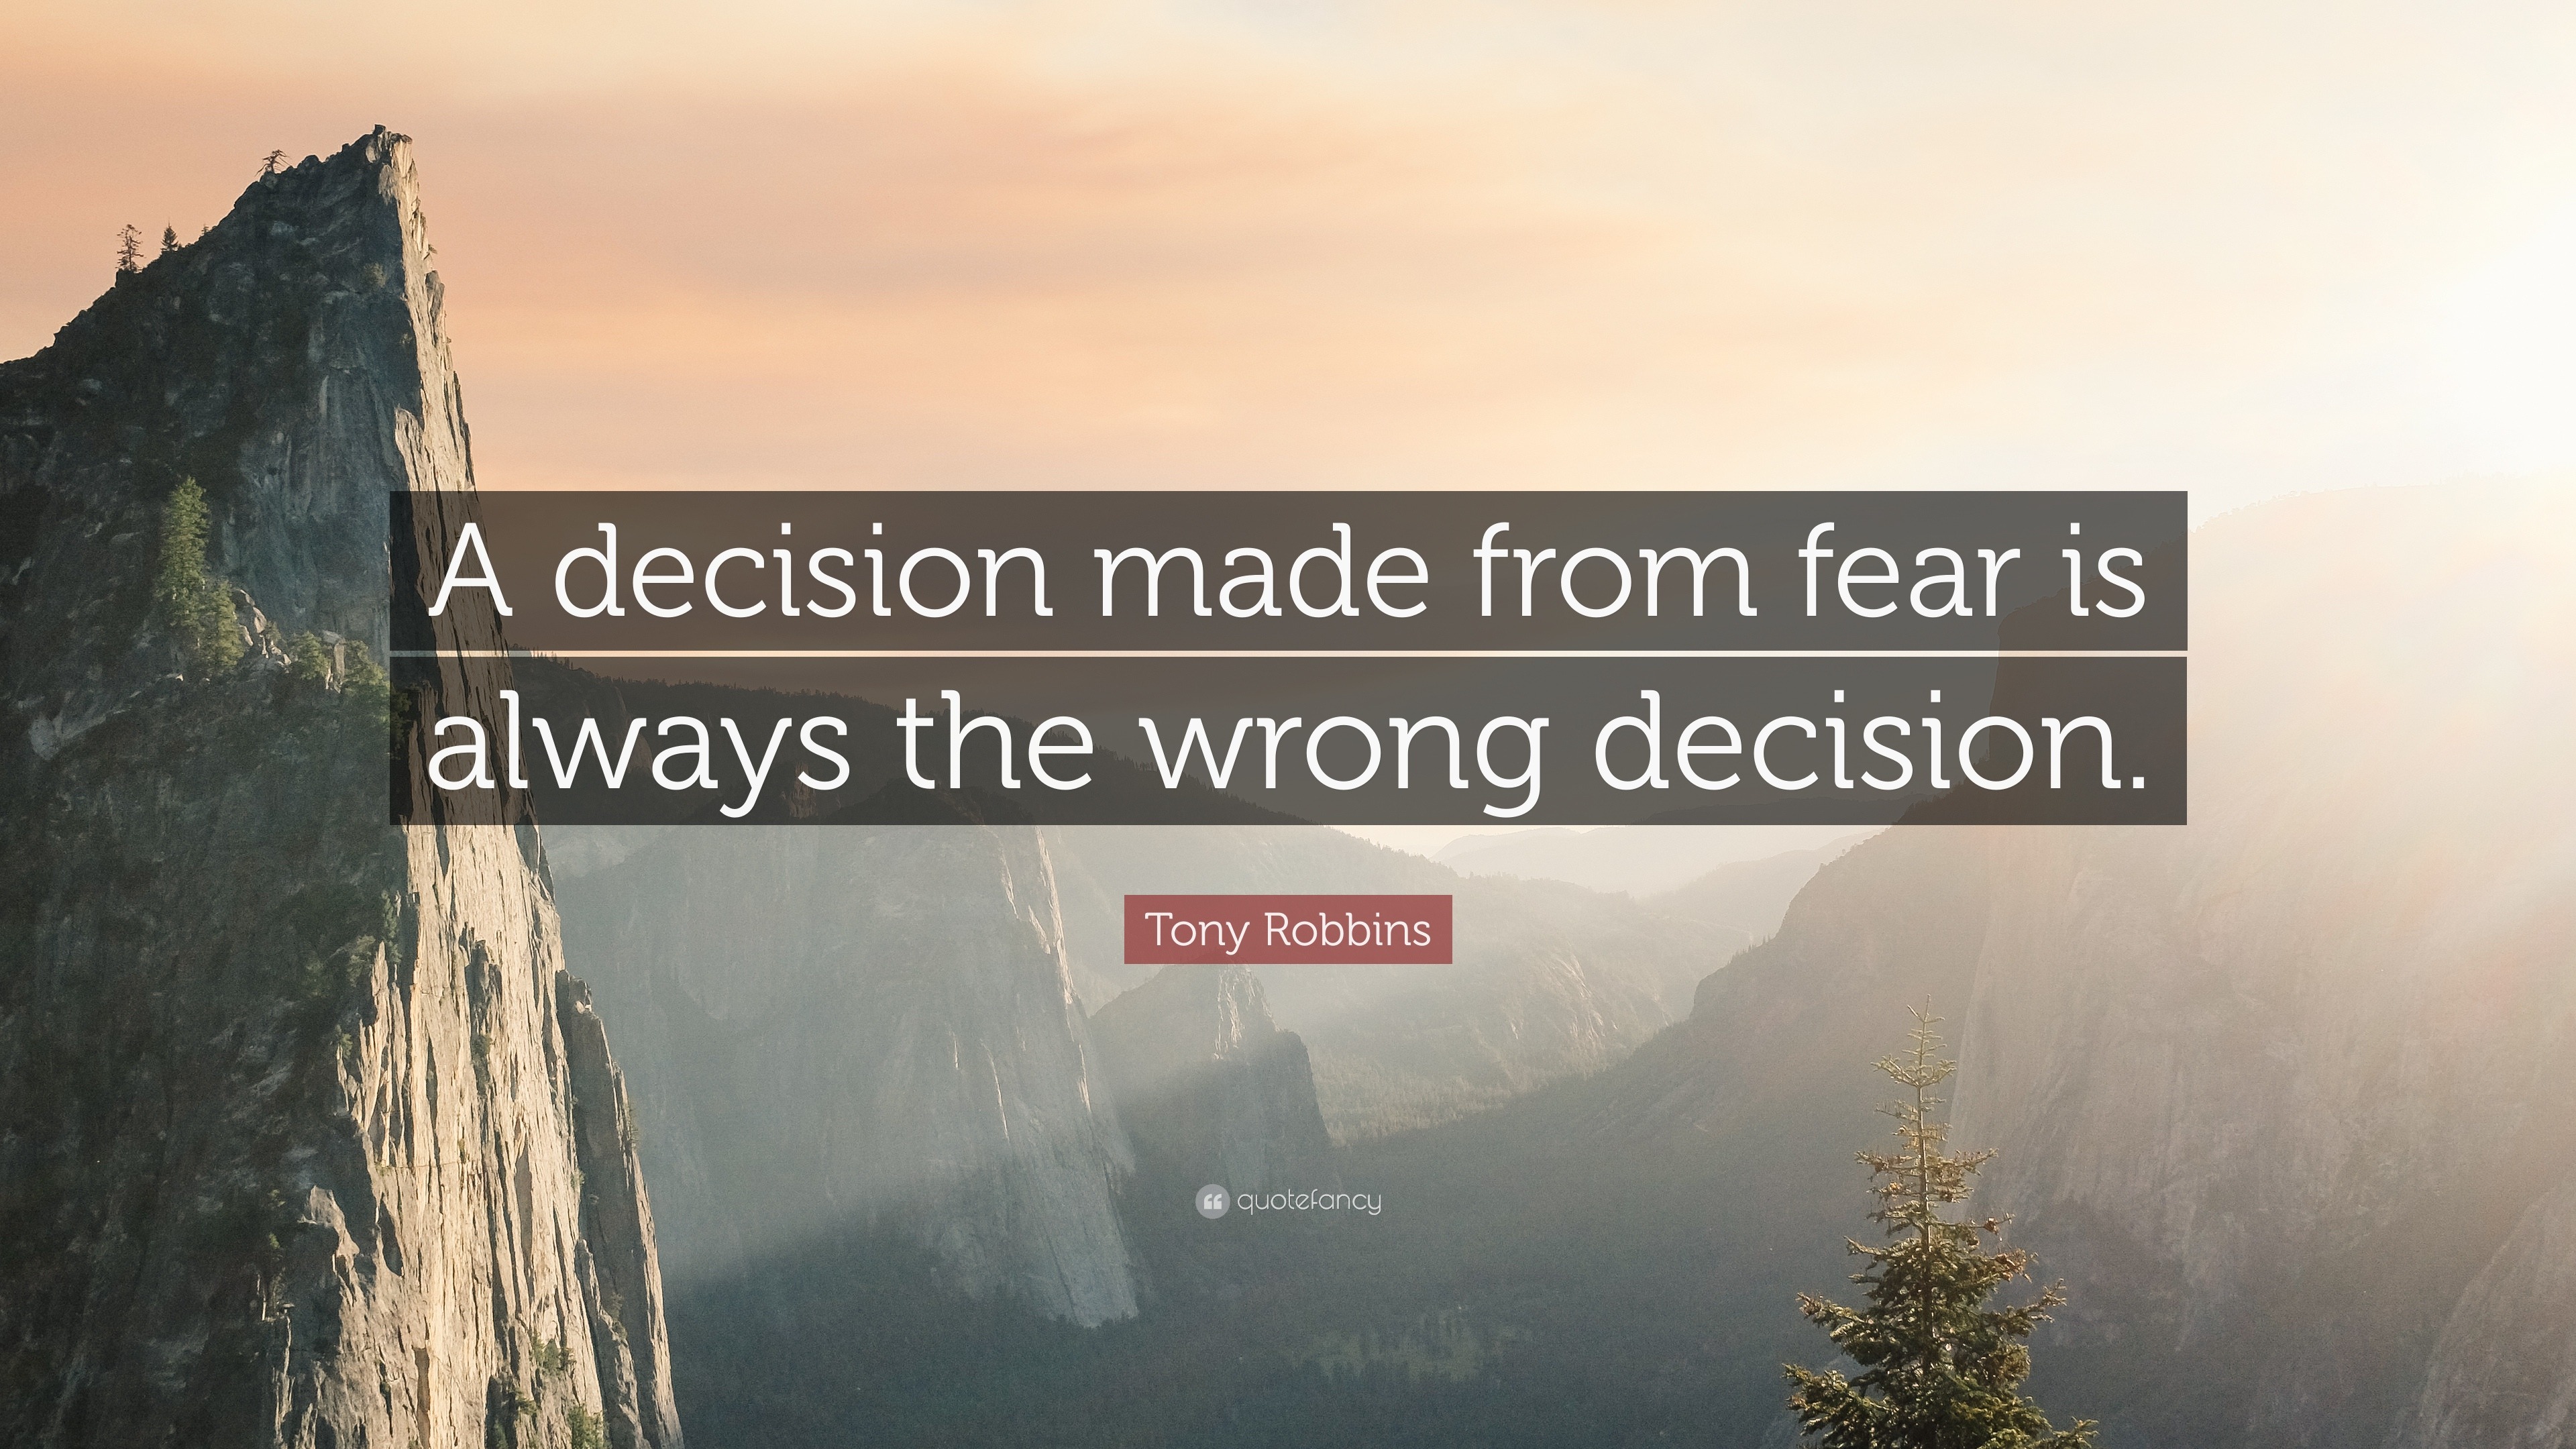 stay committed to your decision quotes